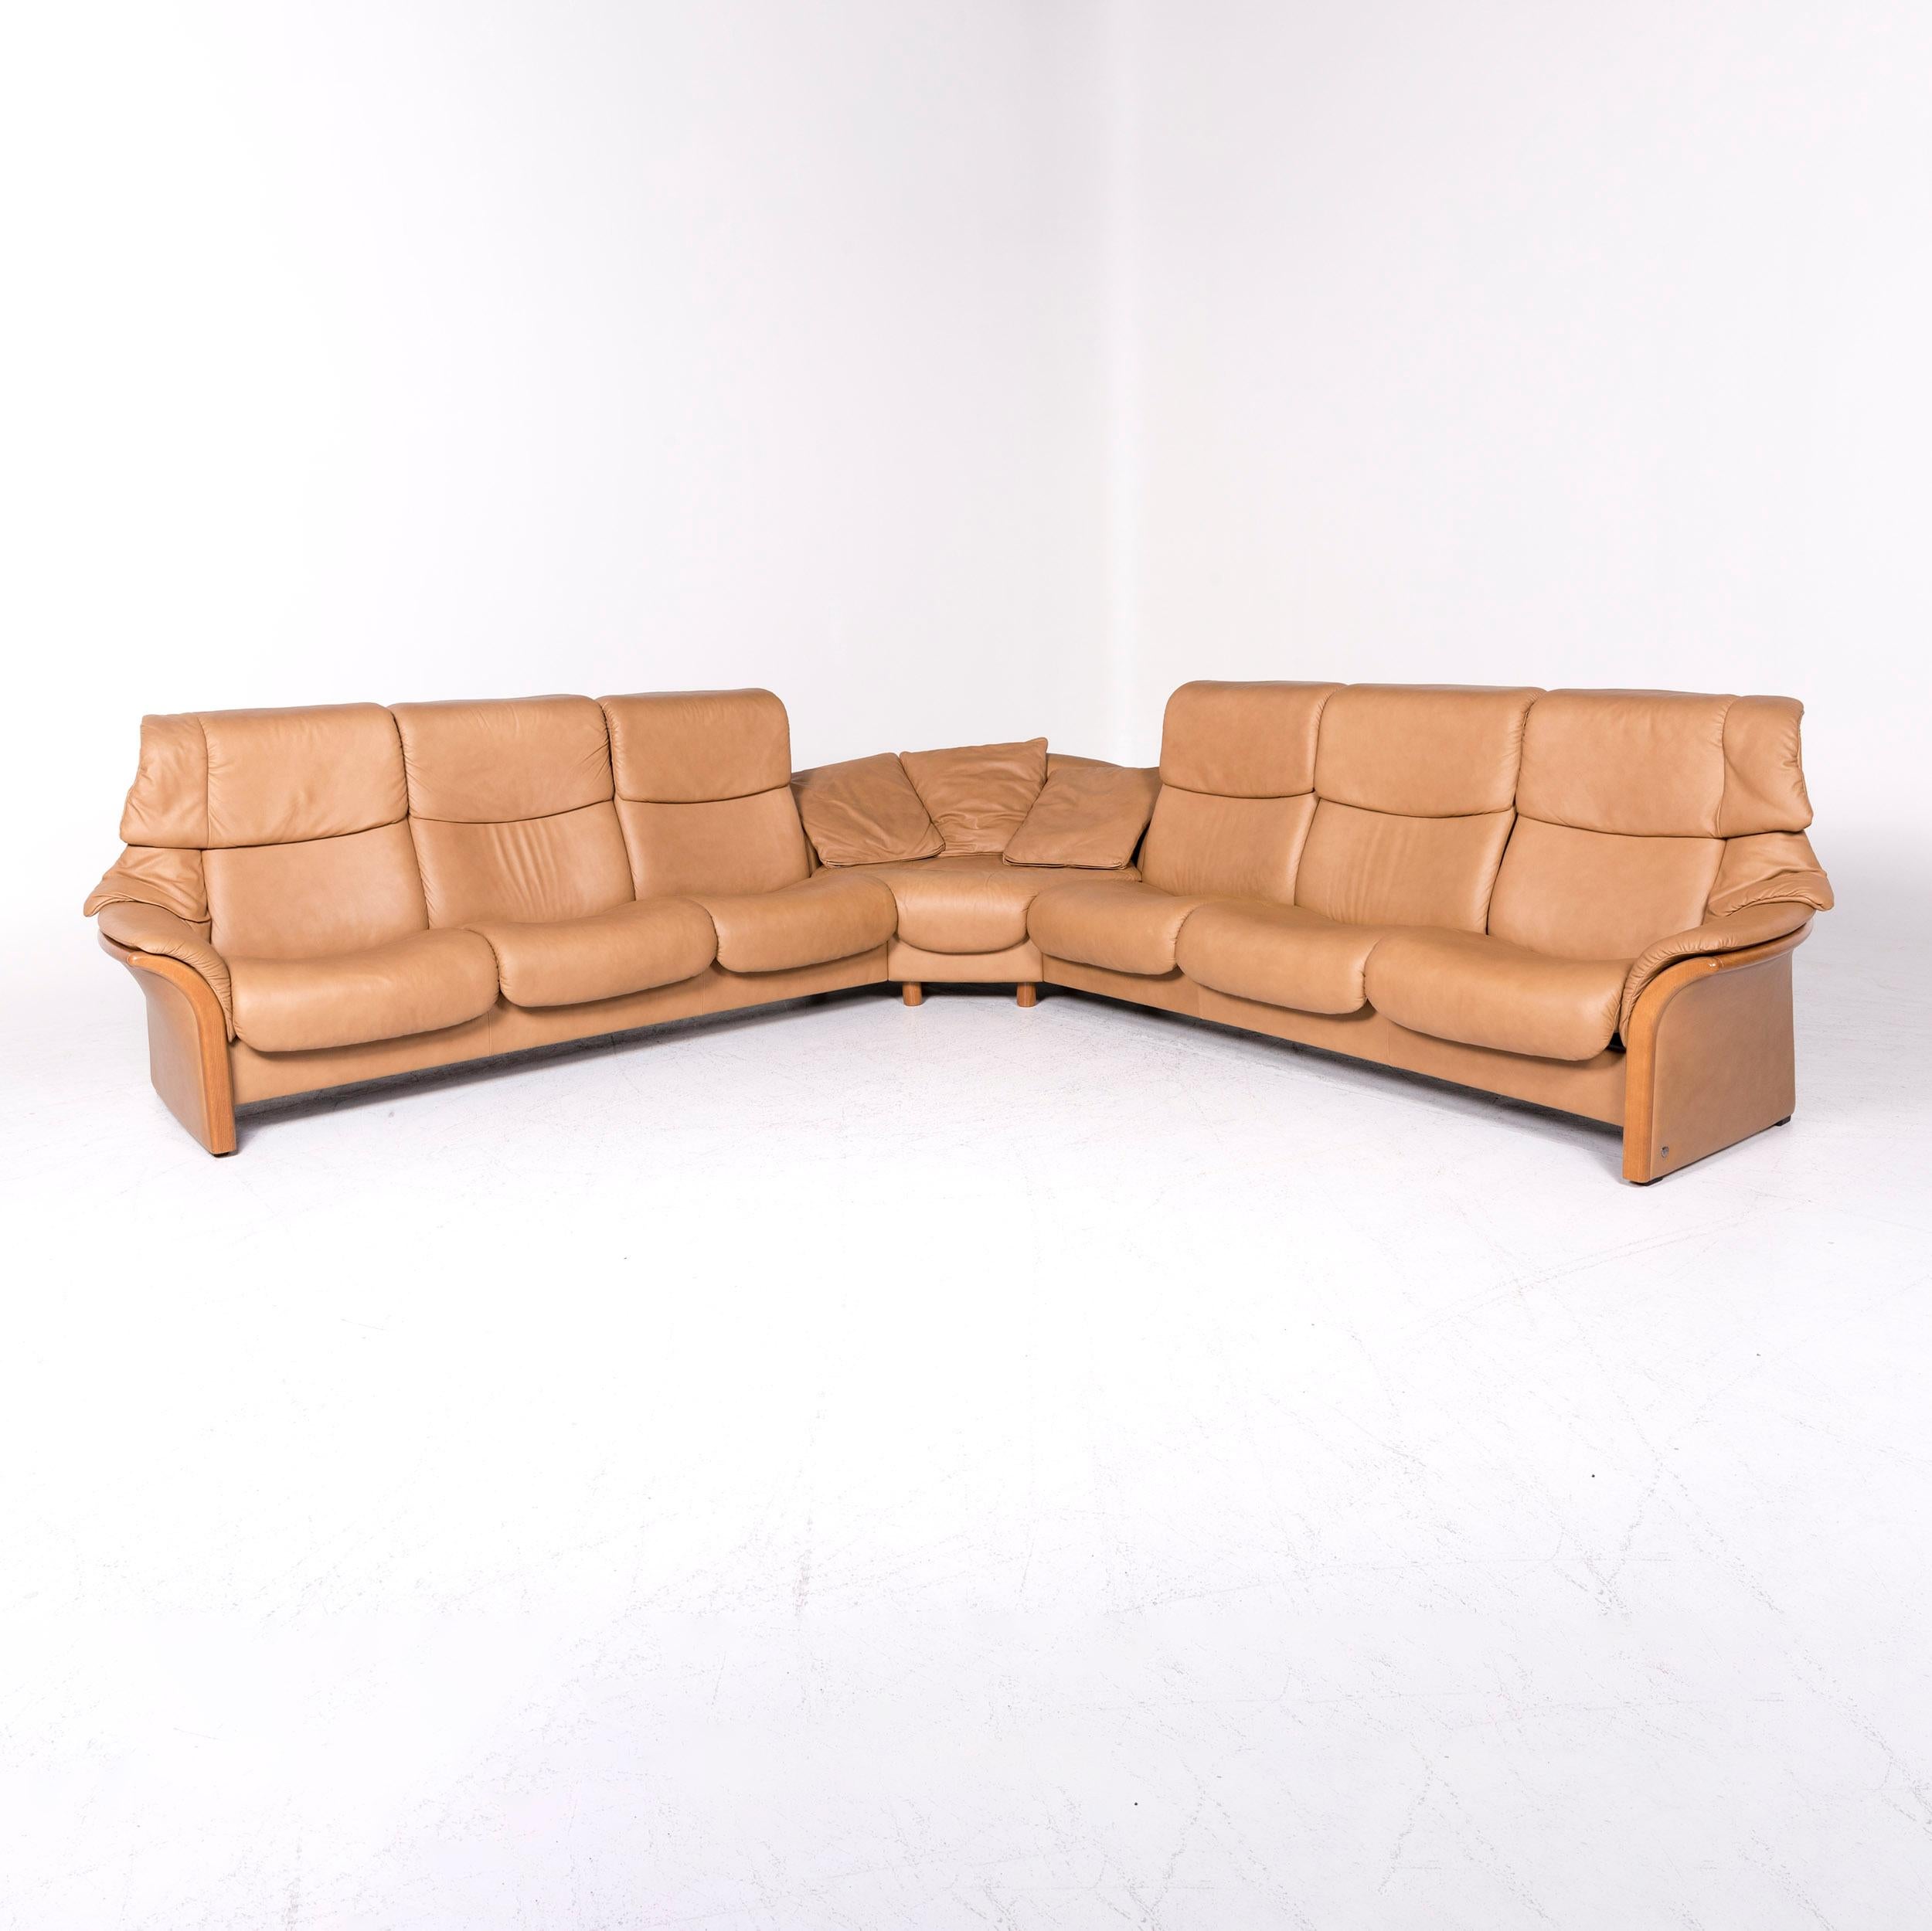 We bring to you a Stressless Eldorado designer leather corner sofa beige real leather sofa couch.

Product measurements in centimeters:

Depth 331
Width 331
Height 74
Seat-height 54
Rest-height 58
Seat-depth 48
Seat-width 225
Back-height